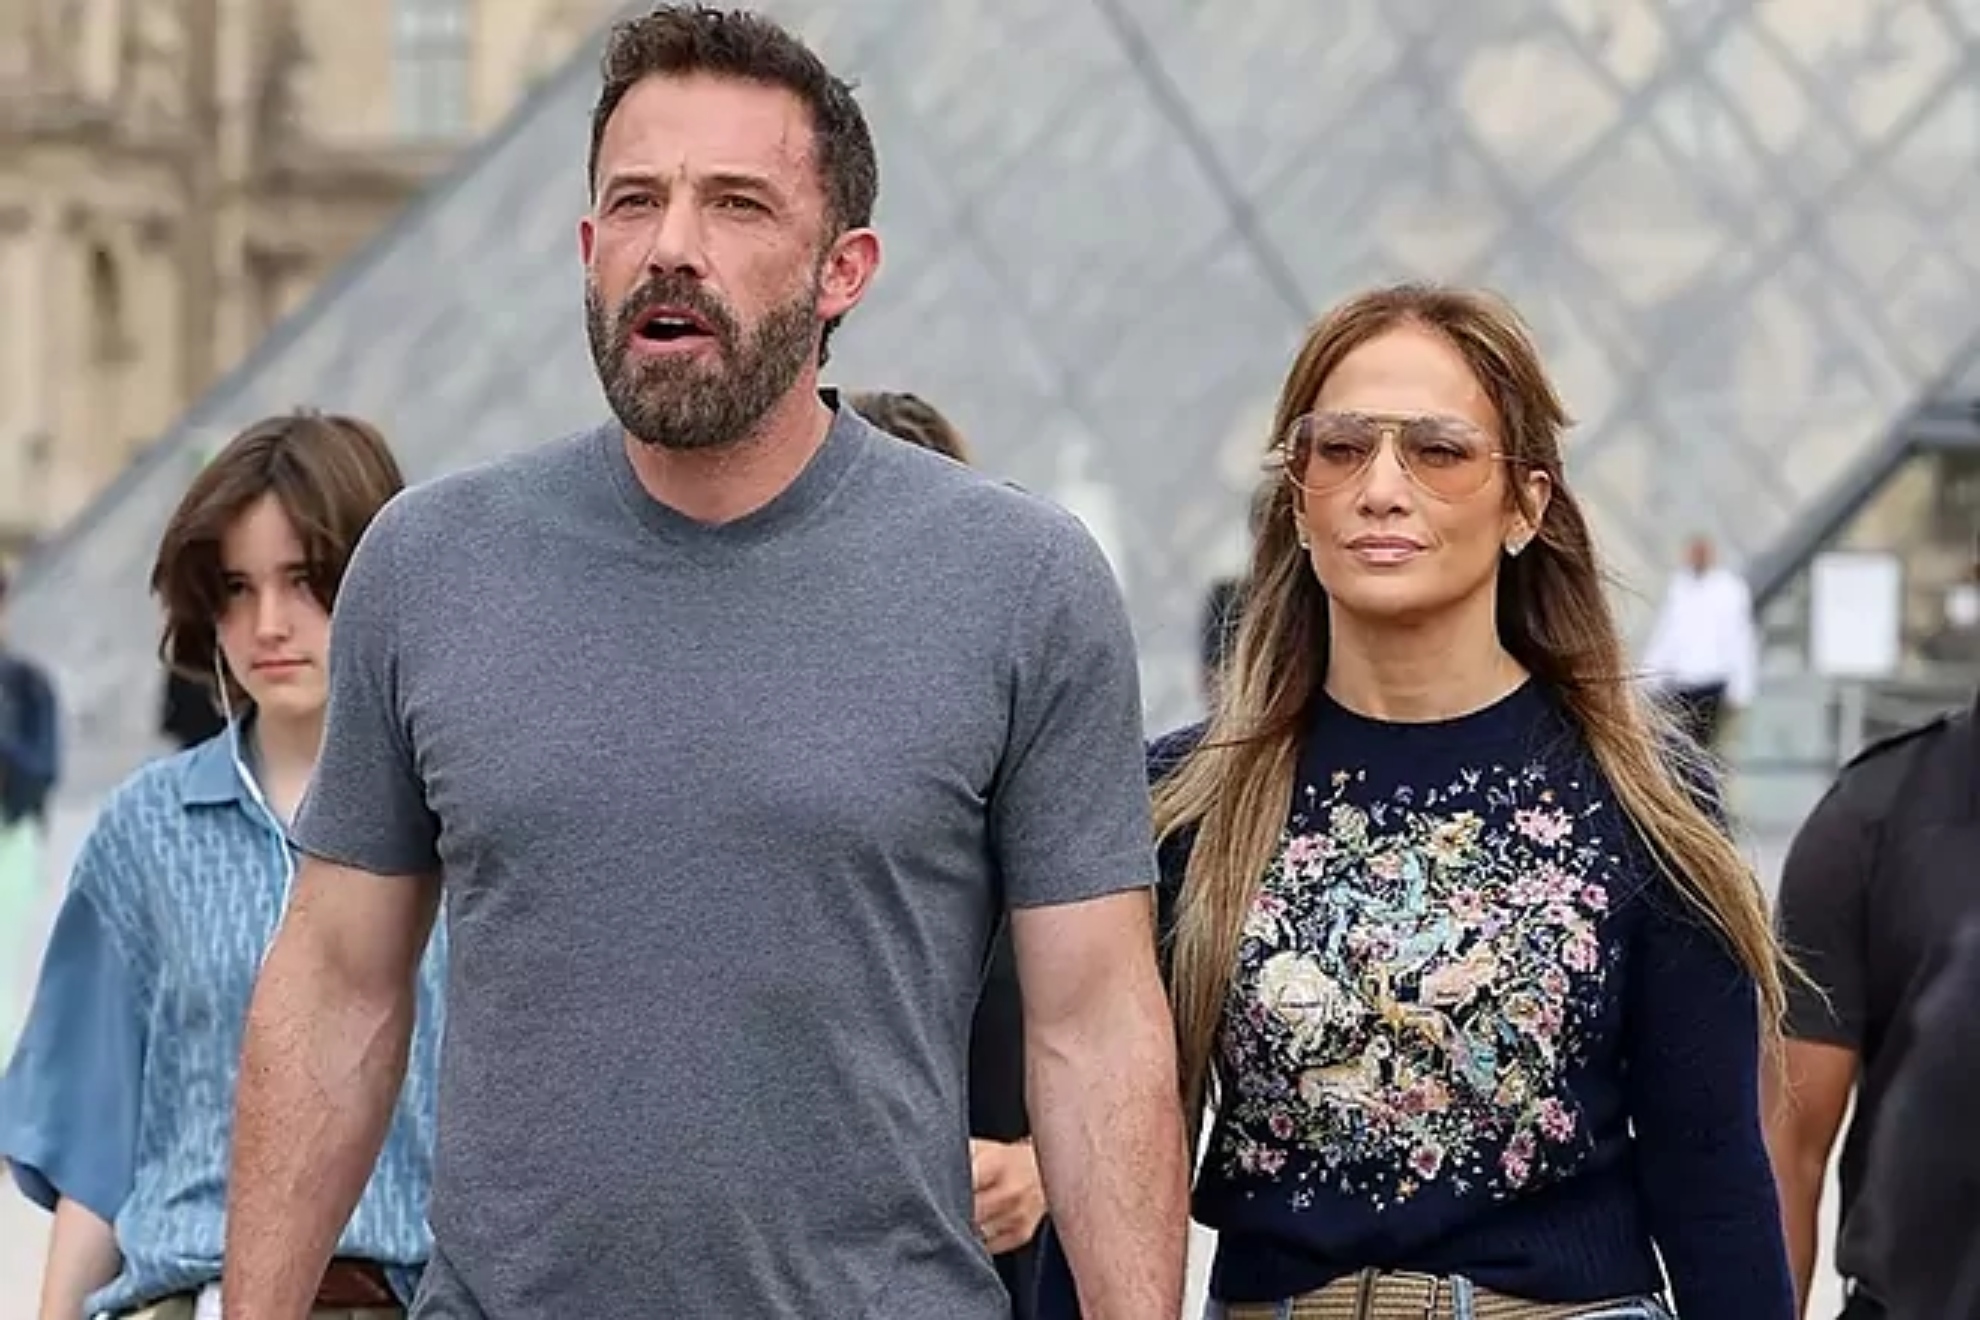 Jennifer Lopez and Ben Affleck argue in public during St. Barts outing